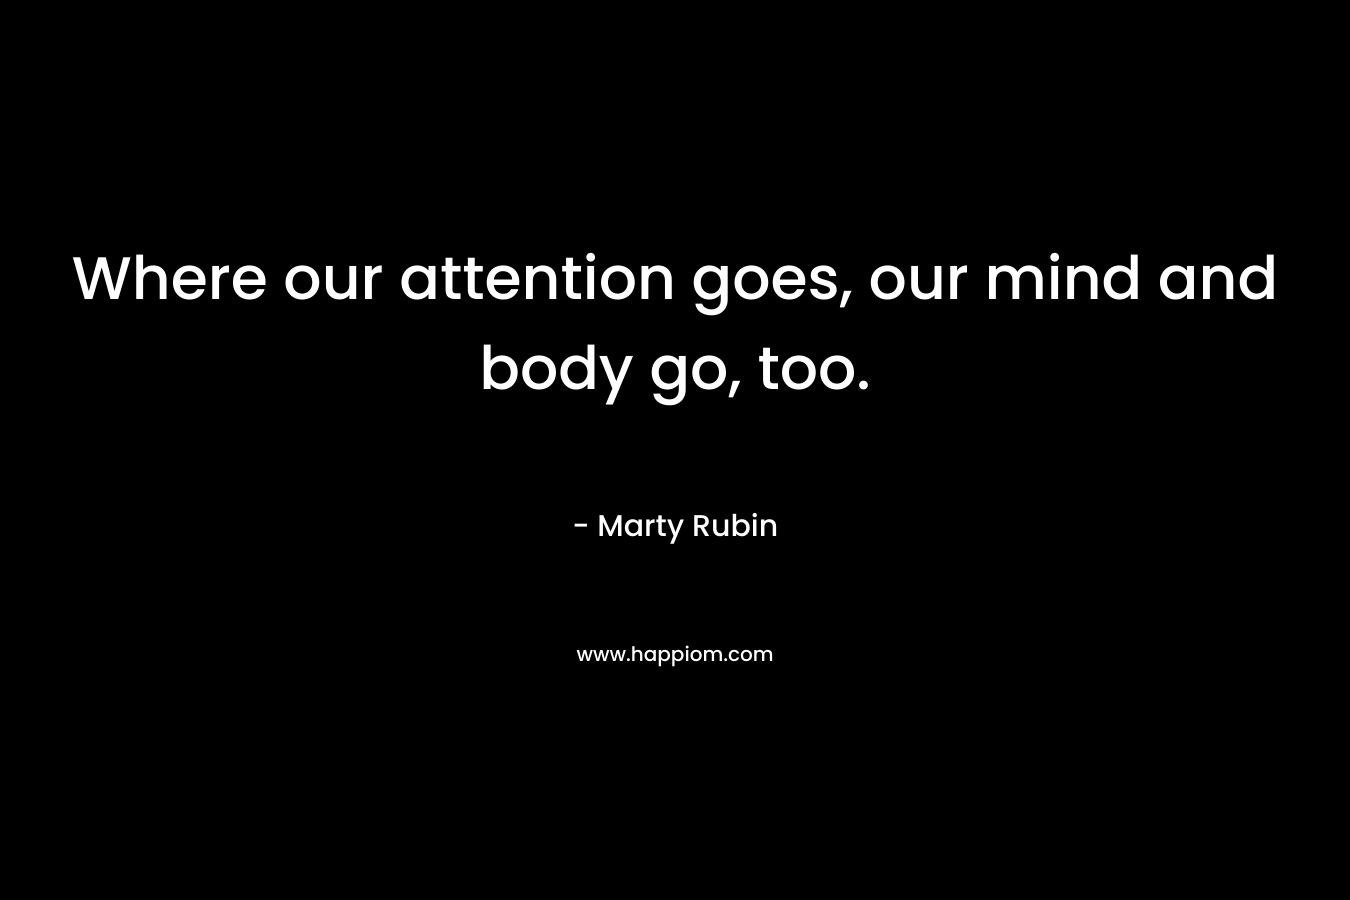 Where our attention goes, our mind and body go, too.